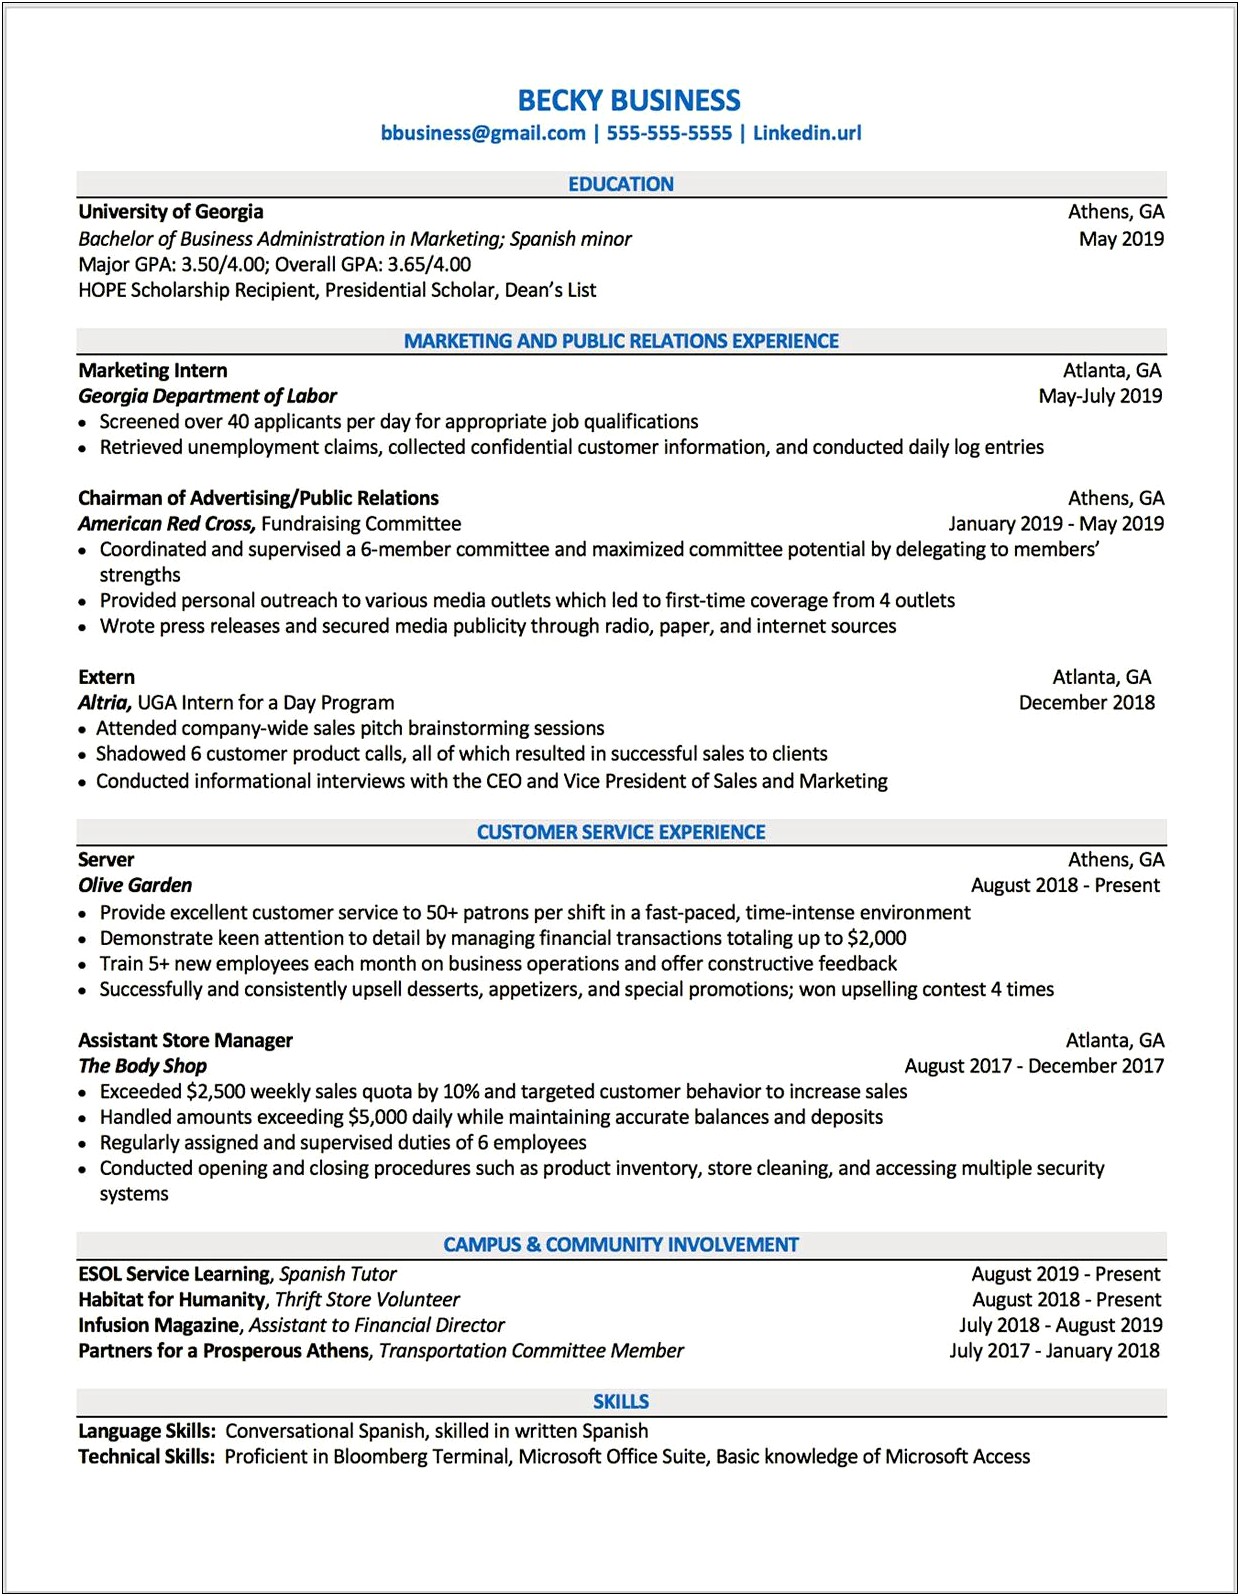 Resume Description Goodwill Store Sales Manages